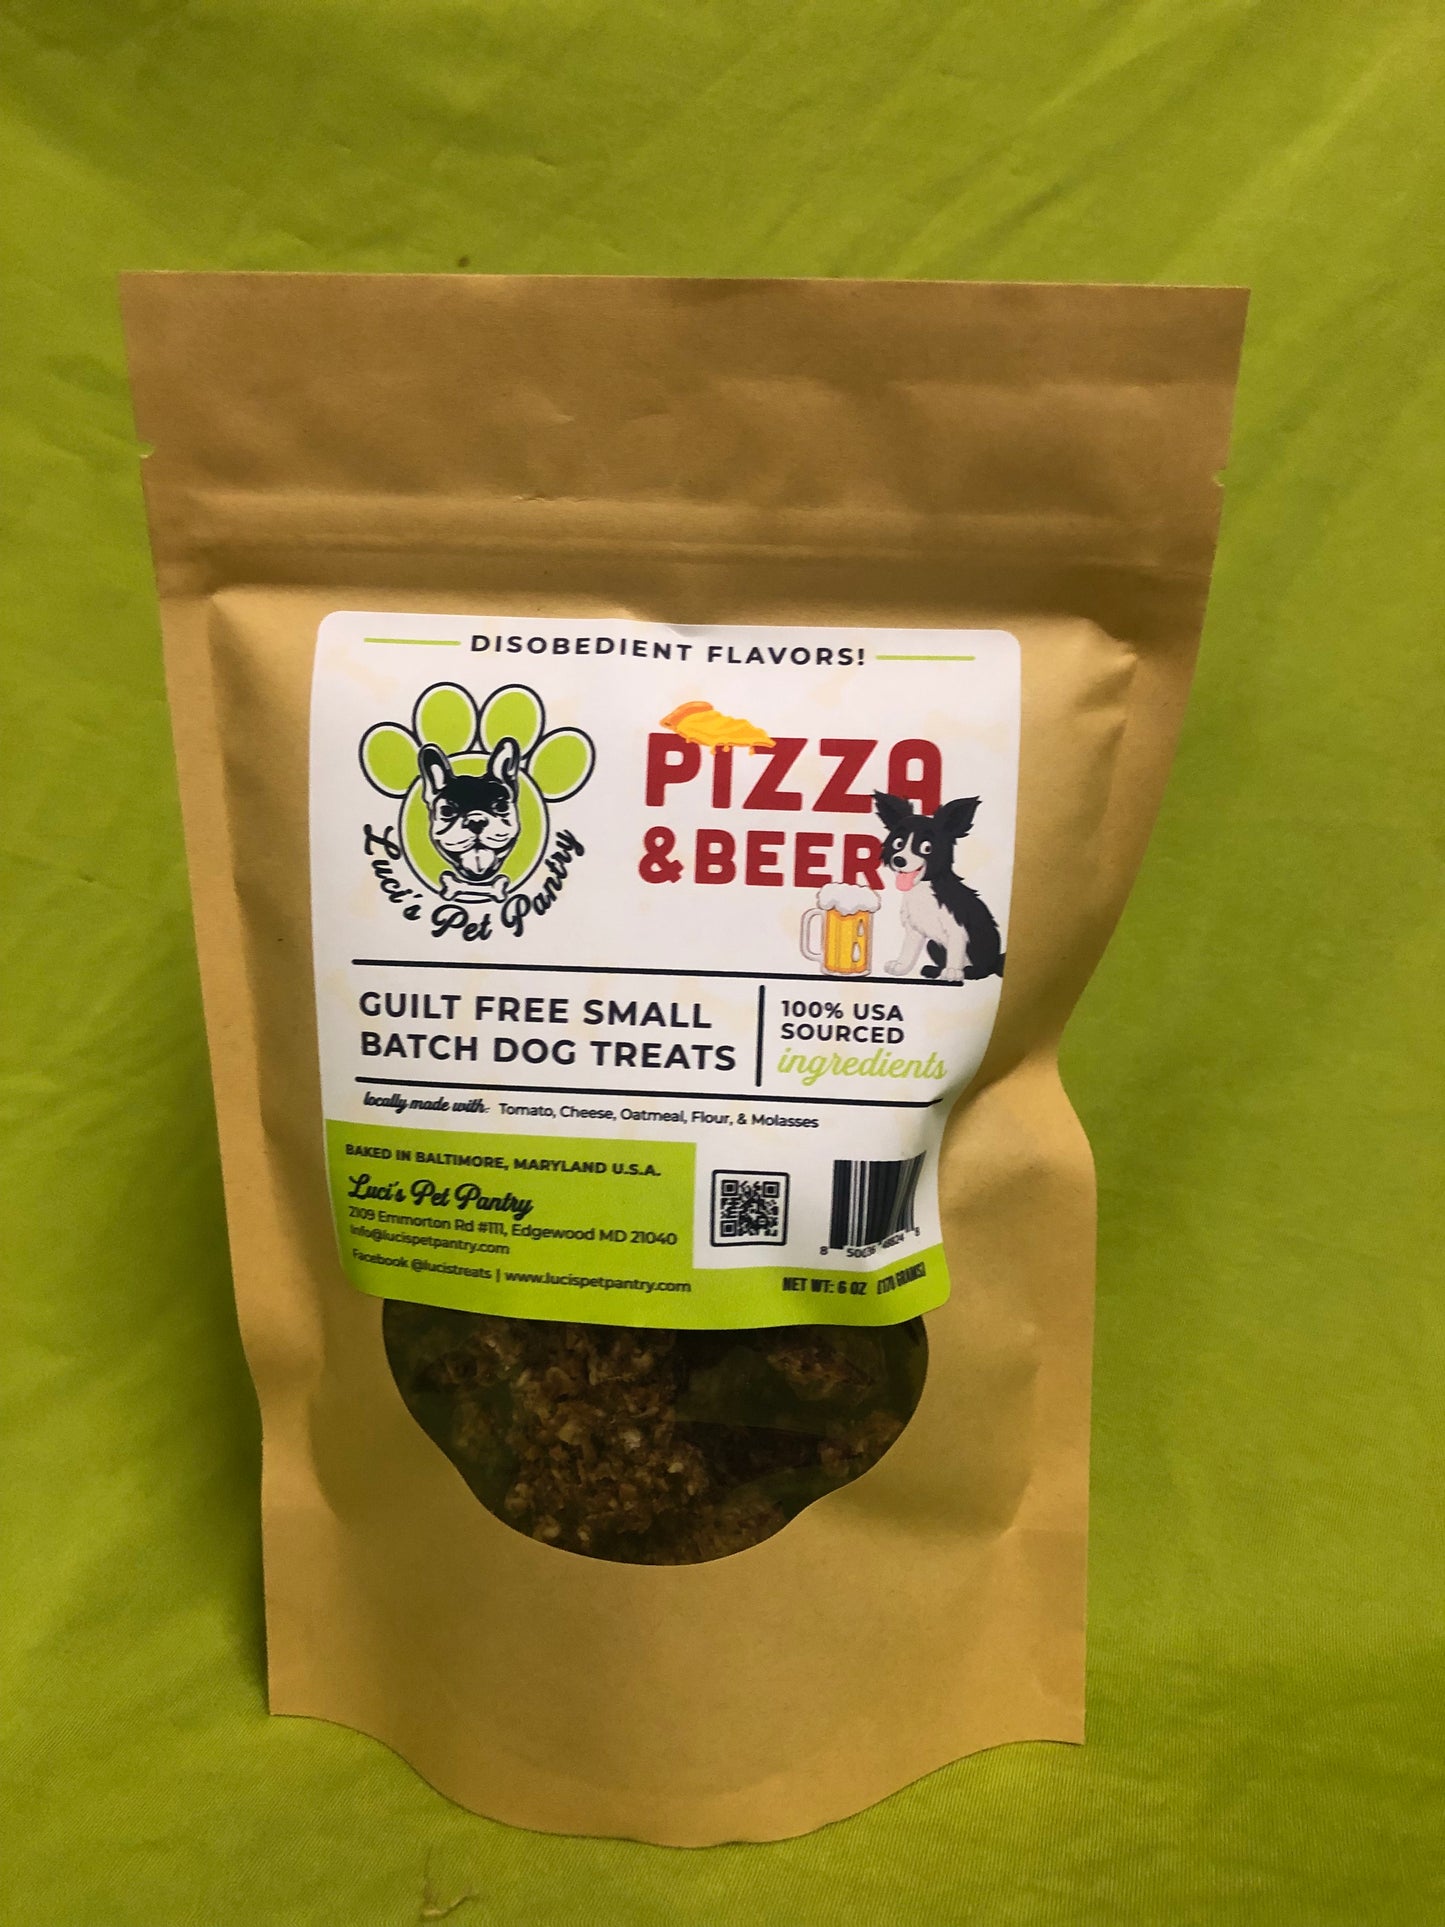 Turkey Bowl - All Natural Turkey & Beer Dog & Puppy Treats - Disobedient Biscuits! 6 oz. Pouch